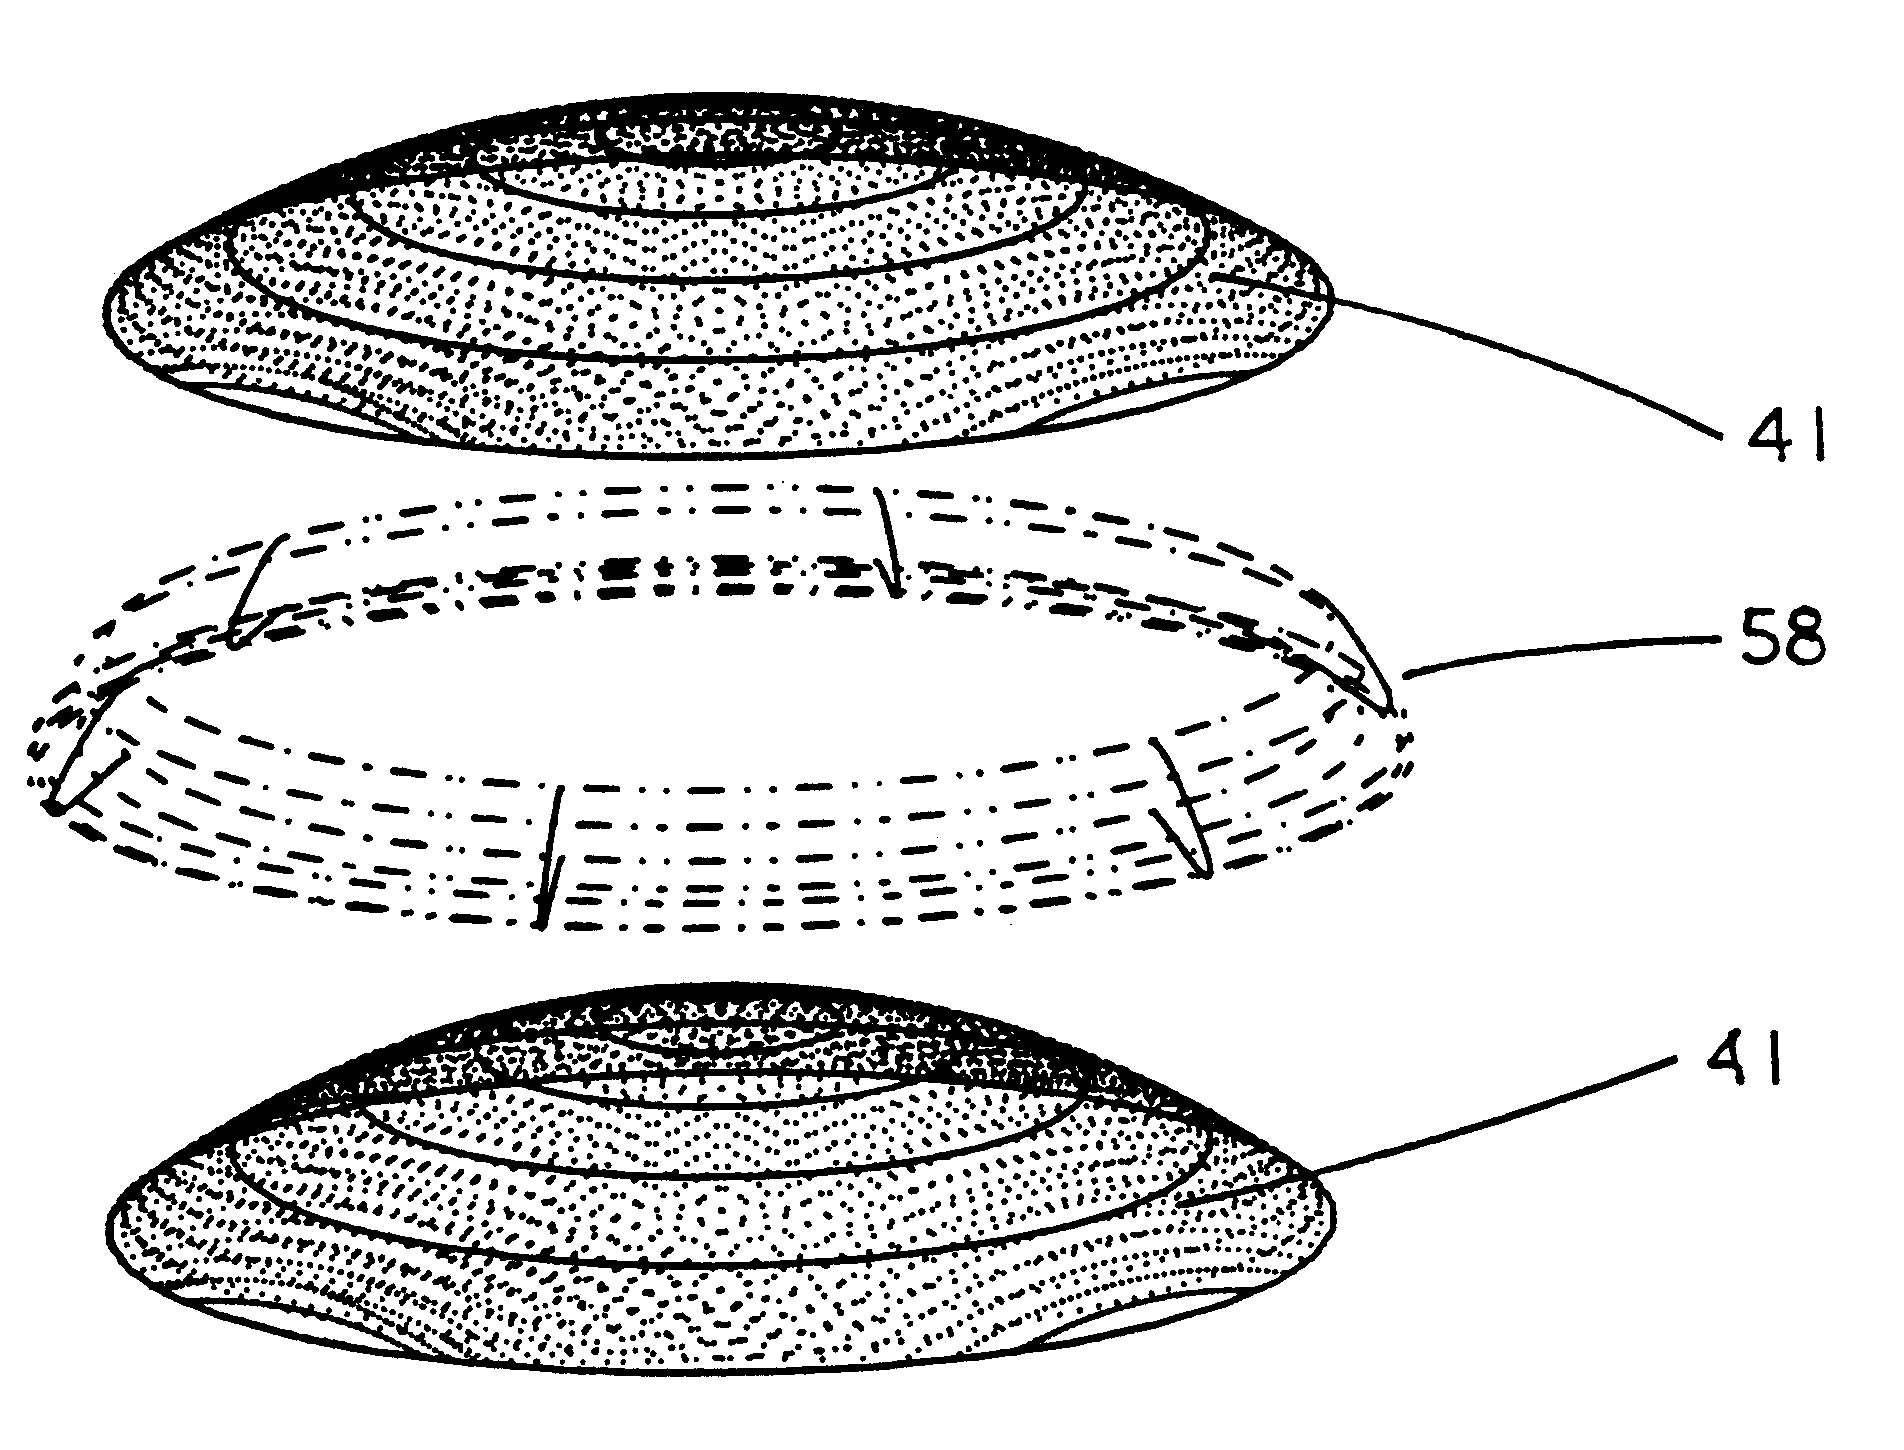 Computer aided contact lens design and fabrication using spline surfaces